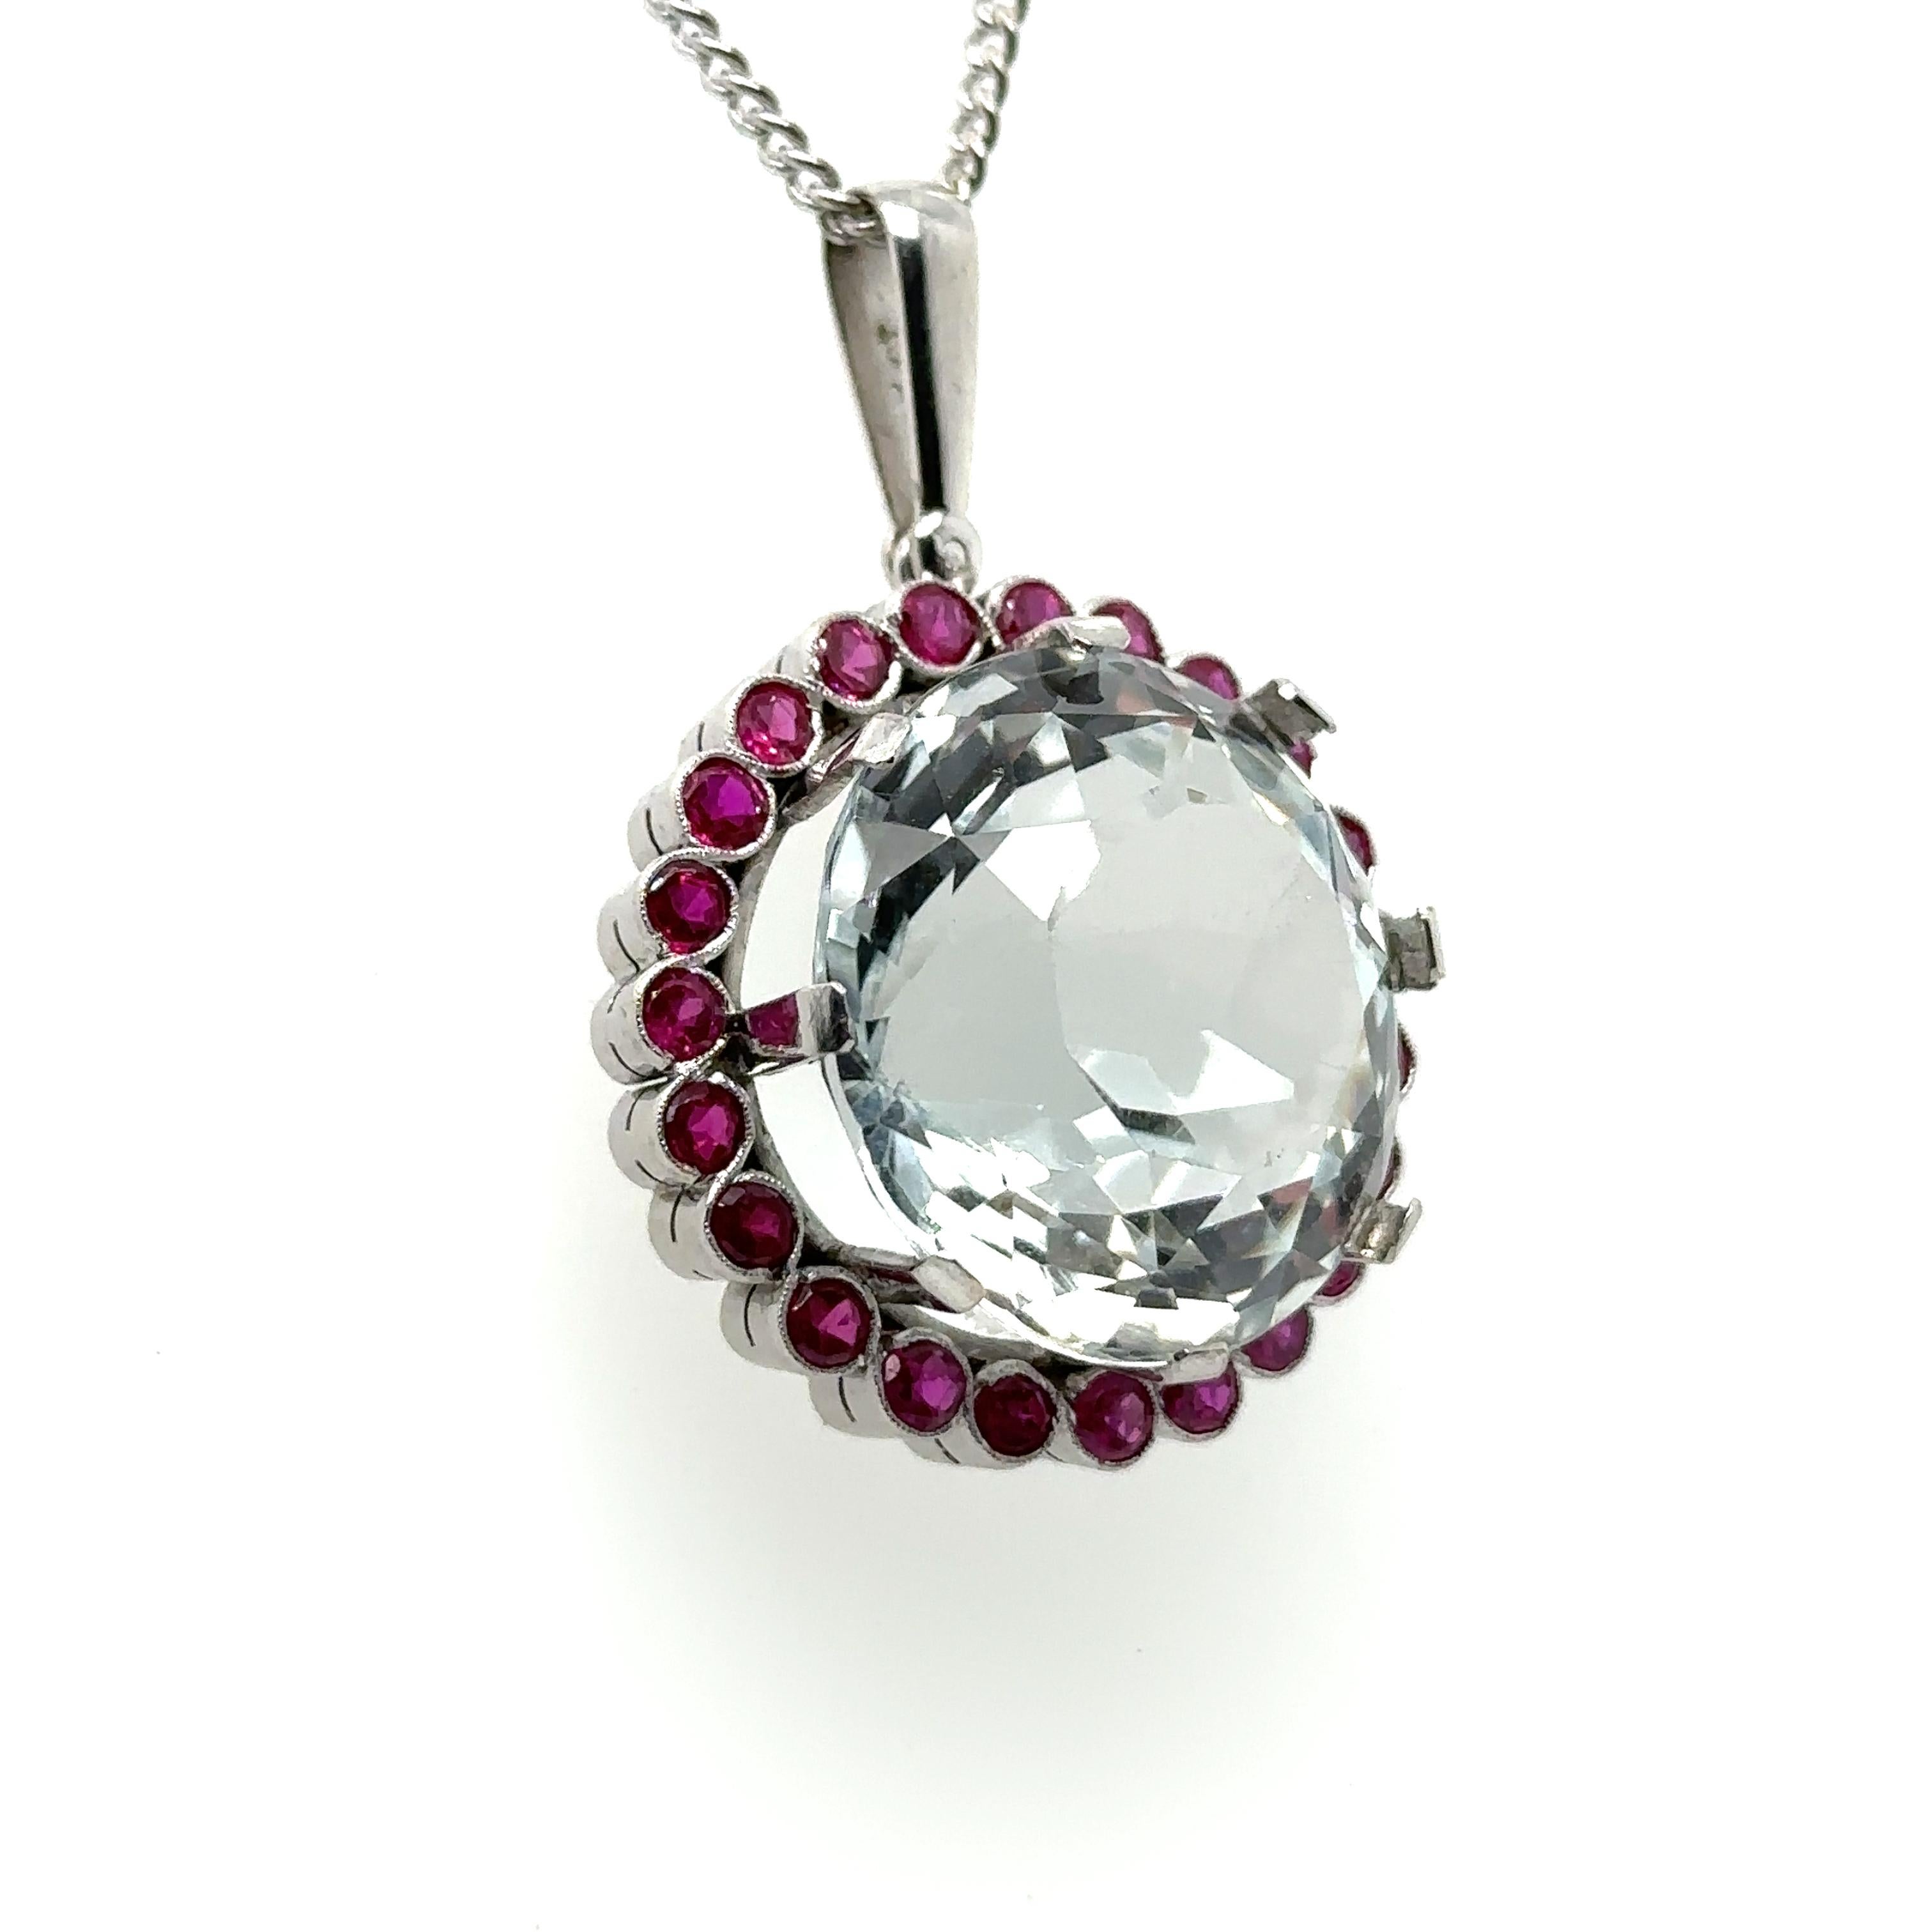 A Round Rock Crystal Round Cluster Pendant, claw set in 18ct white gold within a border of 23 round synthetic rubies.

Rock Crystal 30.00ct (estimated), 20.5mm diameter, 14.0mm depth. Synthetic rubies 2.5mm

Handmade mount

Metal: 18ct White